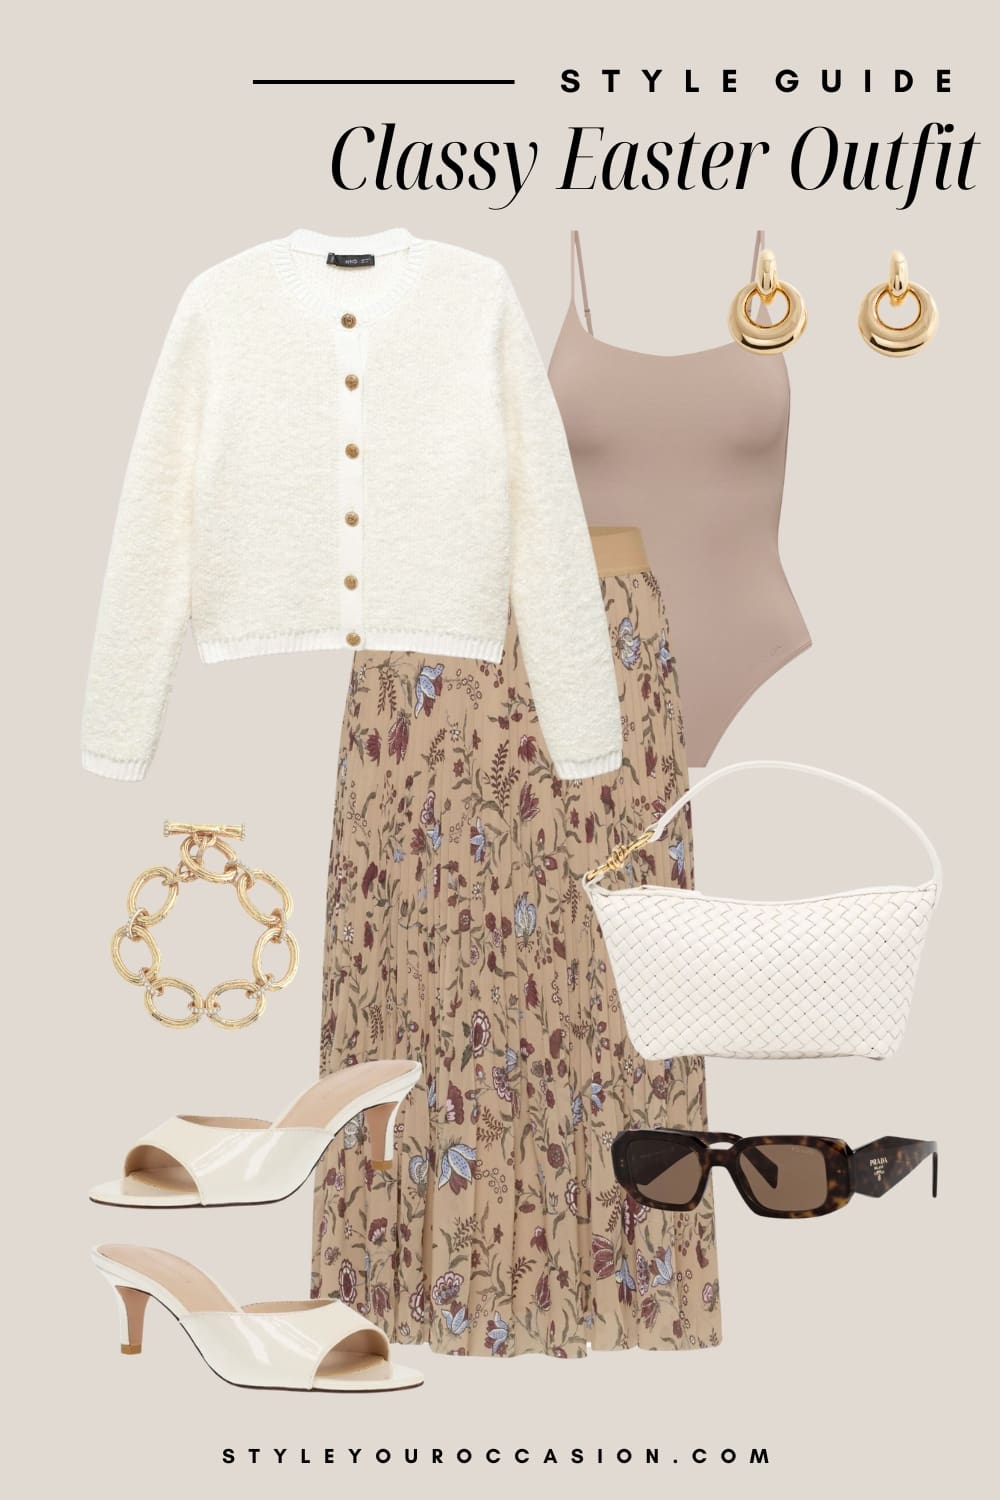 Flat lay graphic of a floral maxi skirt, tan bodysuit, white cardigan, white kitten heels and gold accessories.